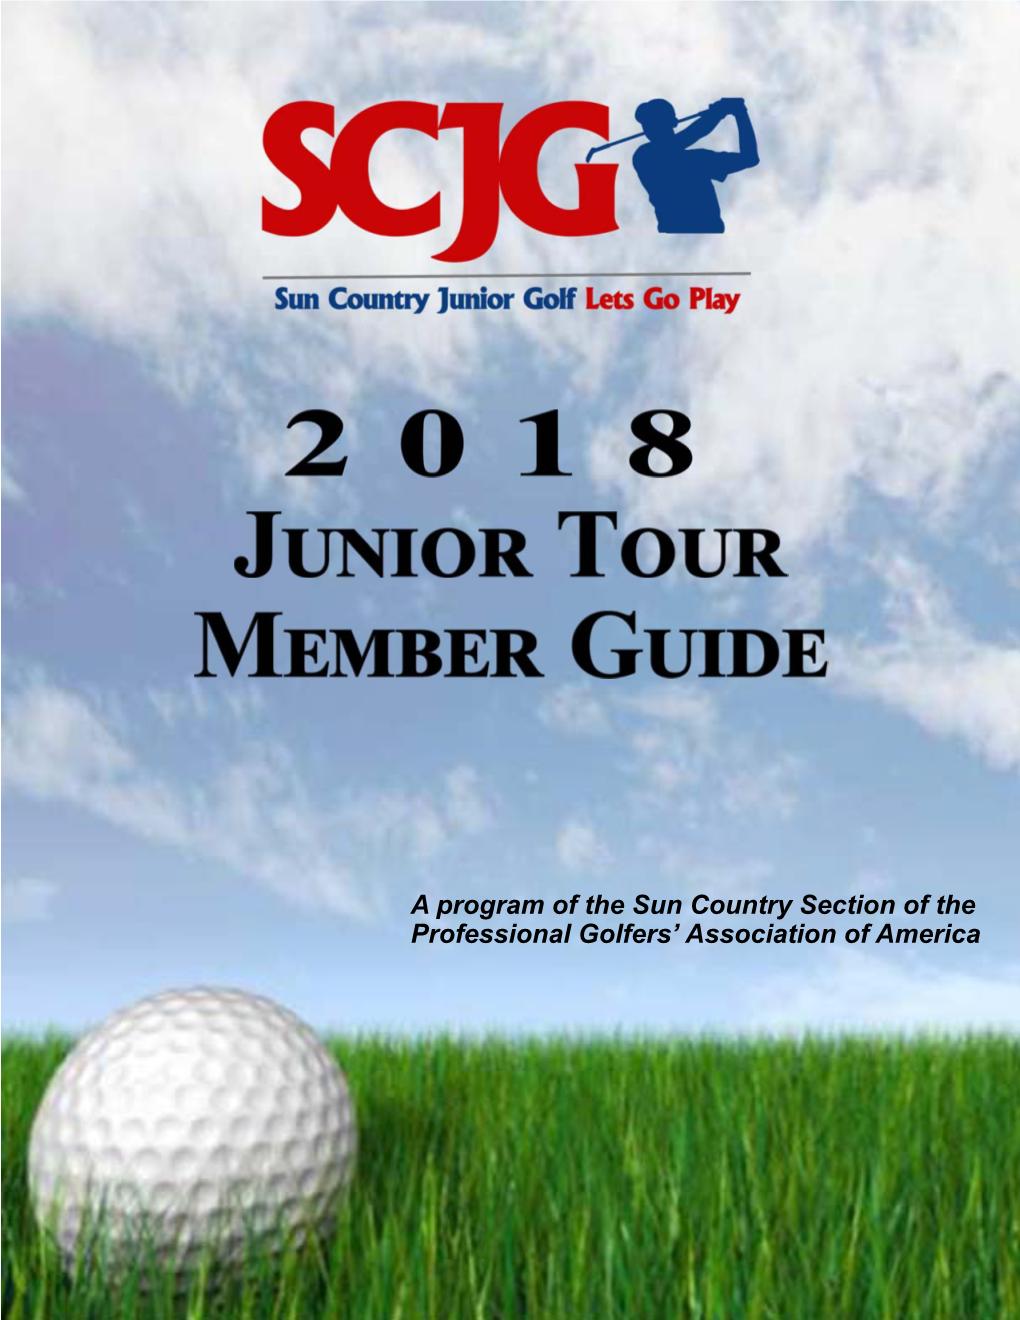 A Program of the Sun Country Section of the Professional Golfers’ Association of America MEMBER GUIDE